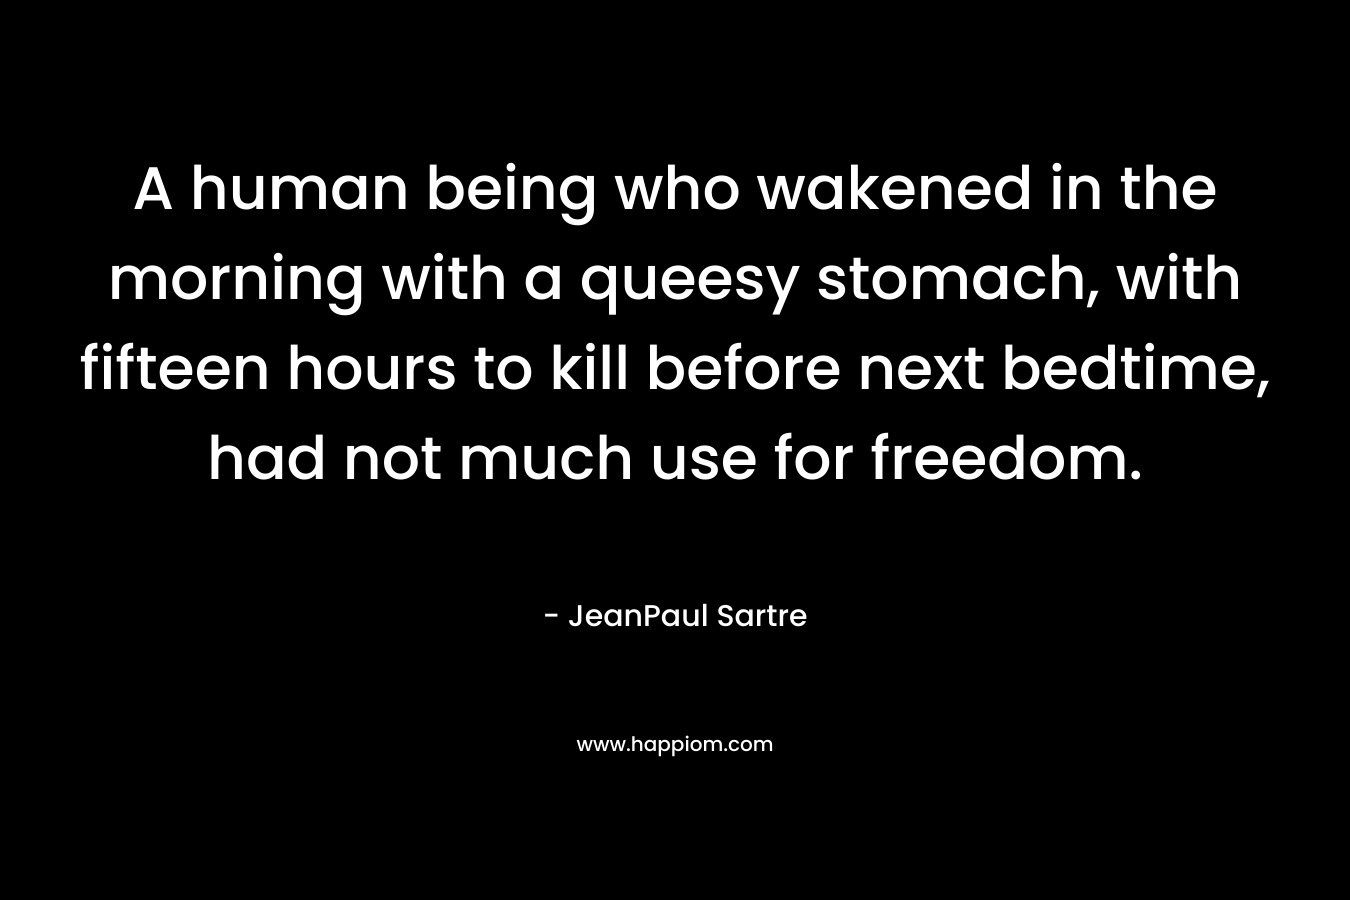 A human being who wakened in the morning with a queesy stomach, with fifteen hours to kill before next bedtime, had not much use for freedom. – JeanPaul Sartre